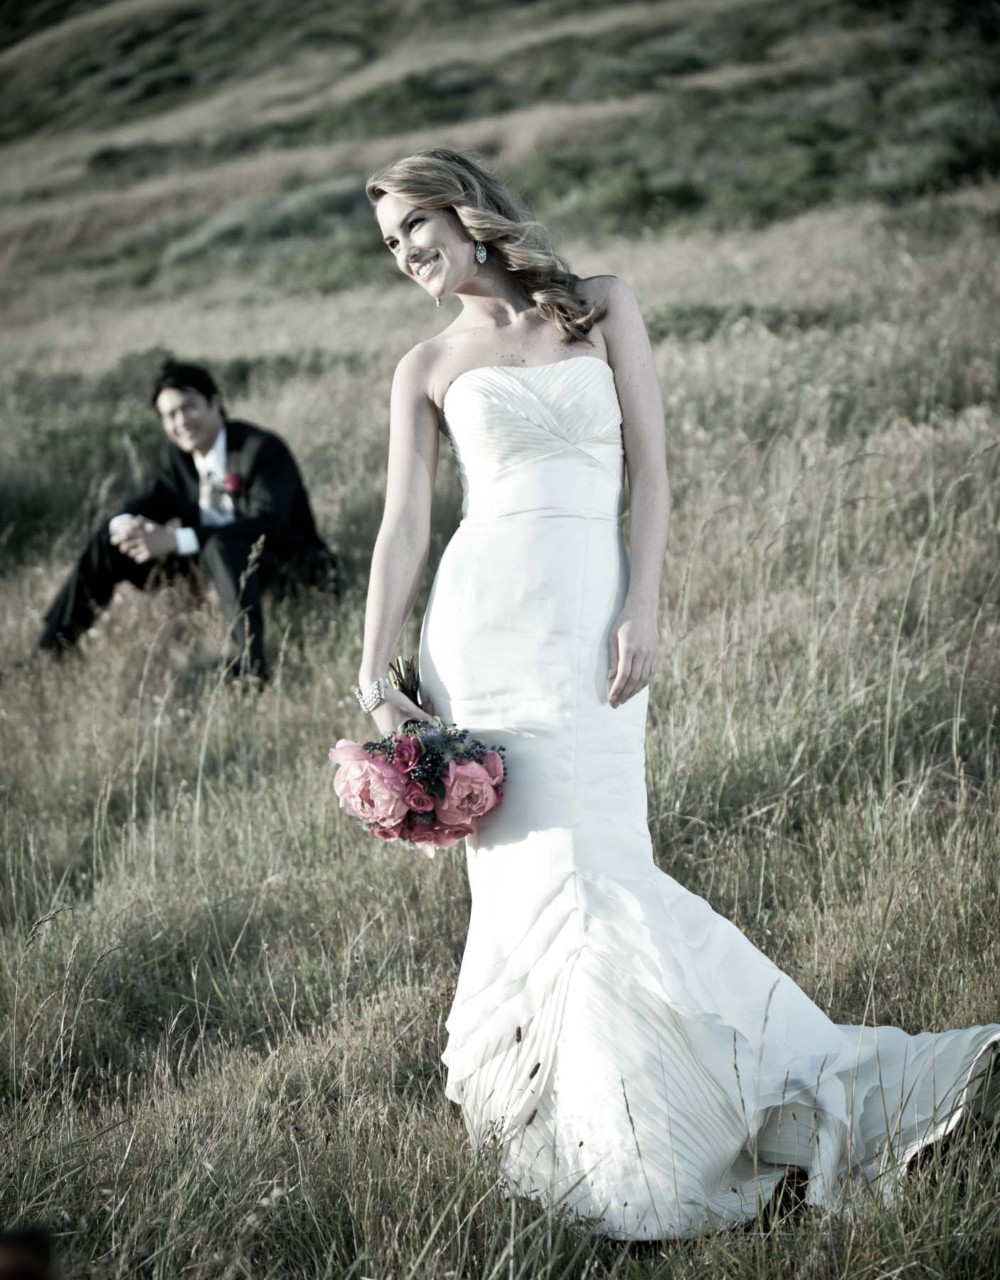 Looking for a professional wedding photographer in Palmer?